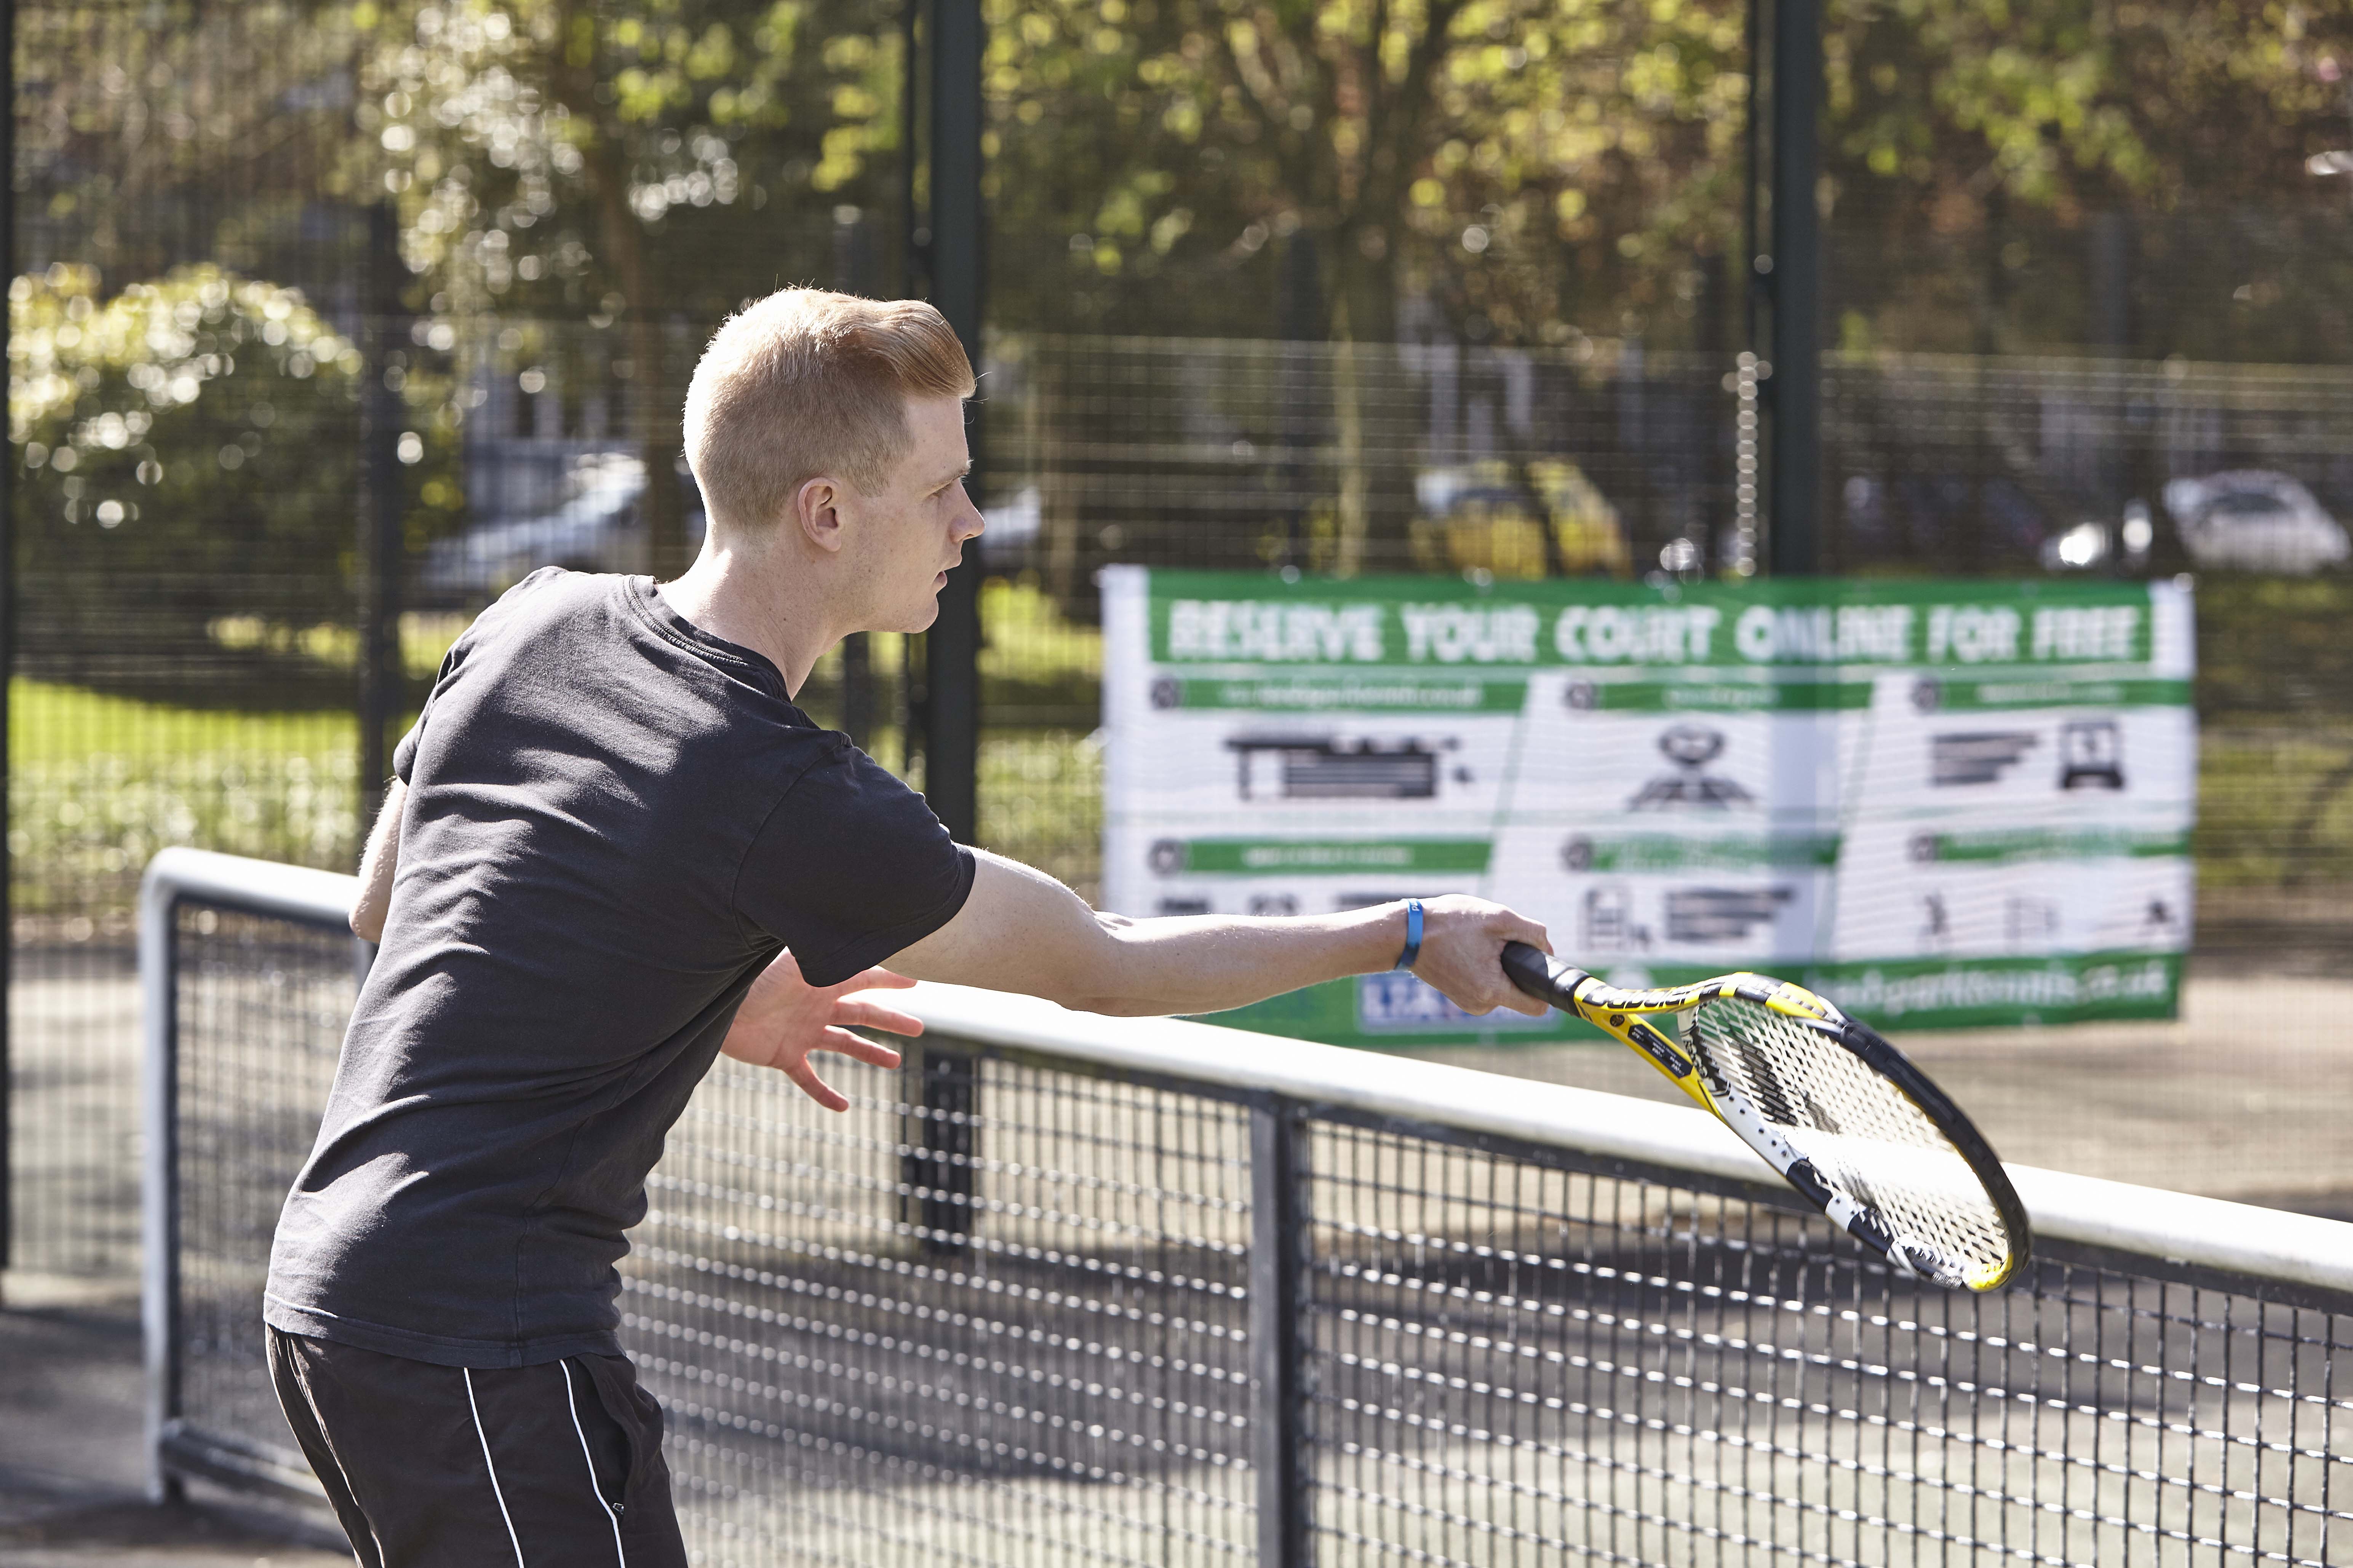 New online court booking system proving to be a smash hit with tennis lovers in Leeds